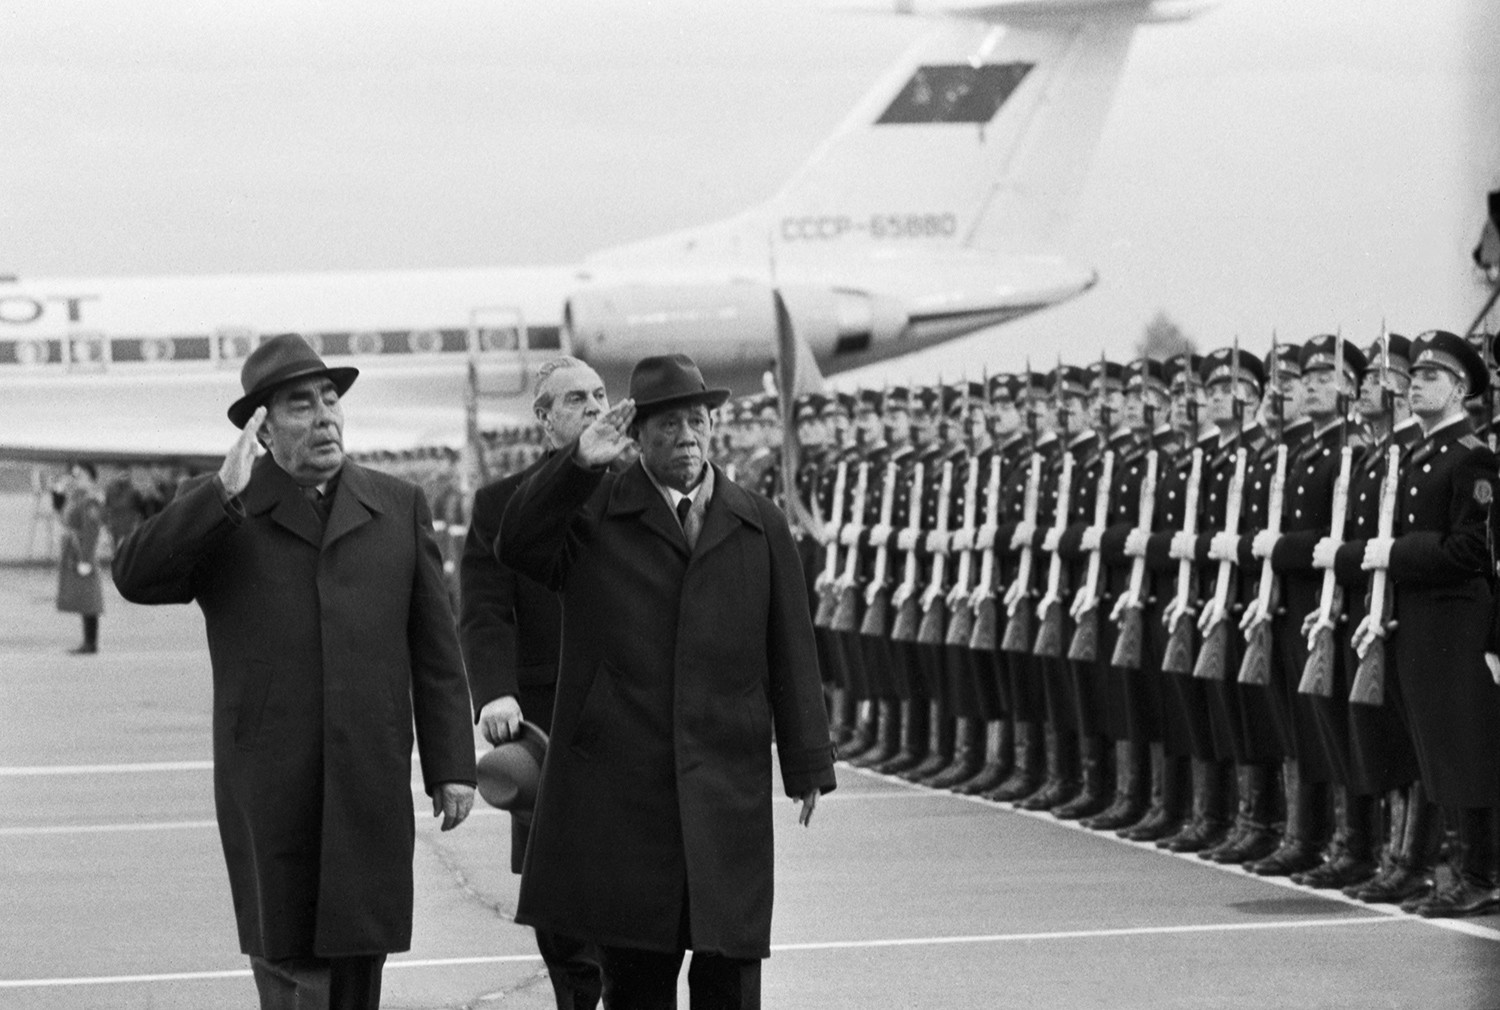 Leonid Brezhnev welcomes Le Duan, the First Secretary of the Workers' Party of Vietnam, at the airport, 1975.